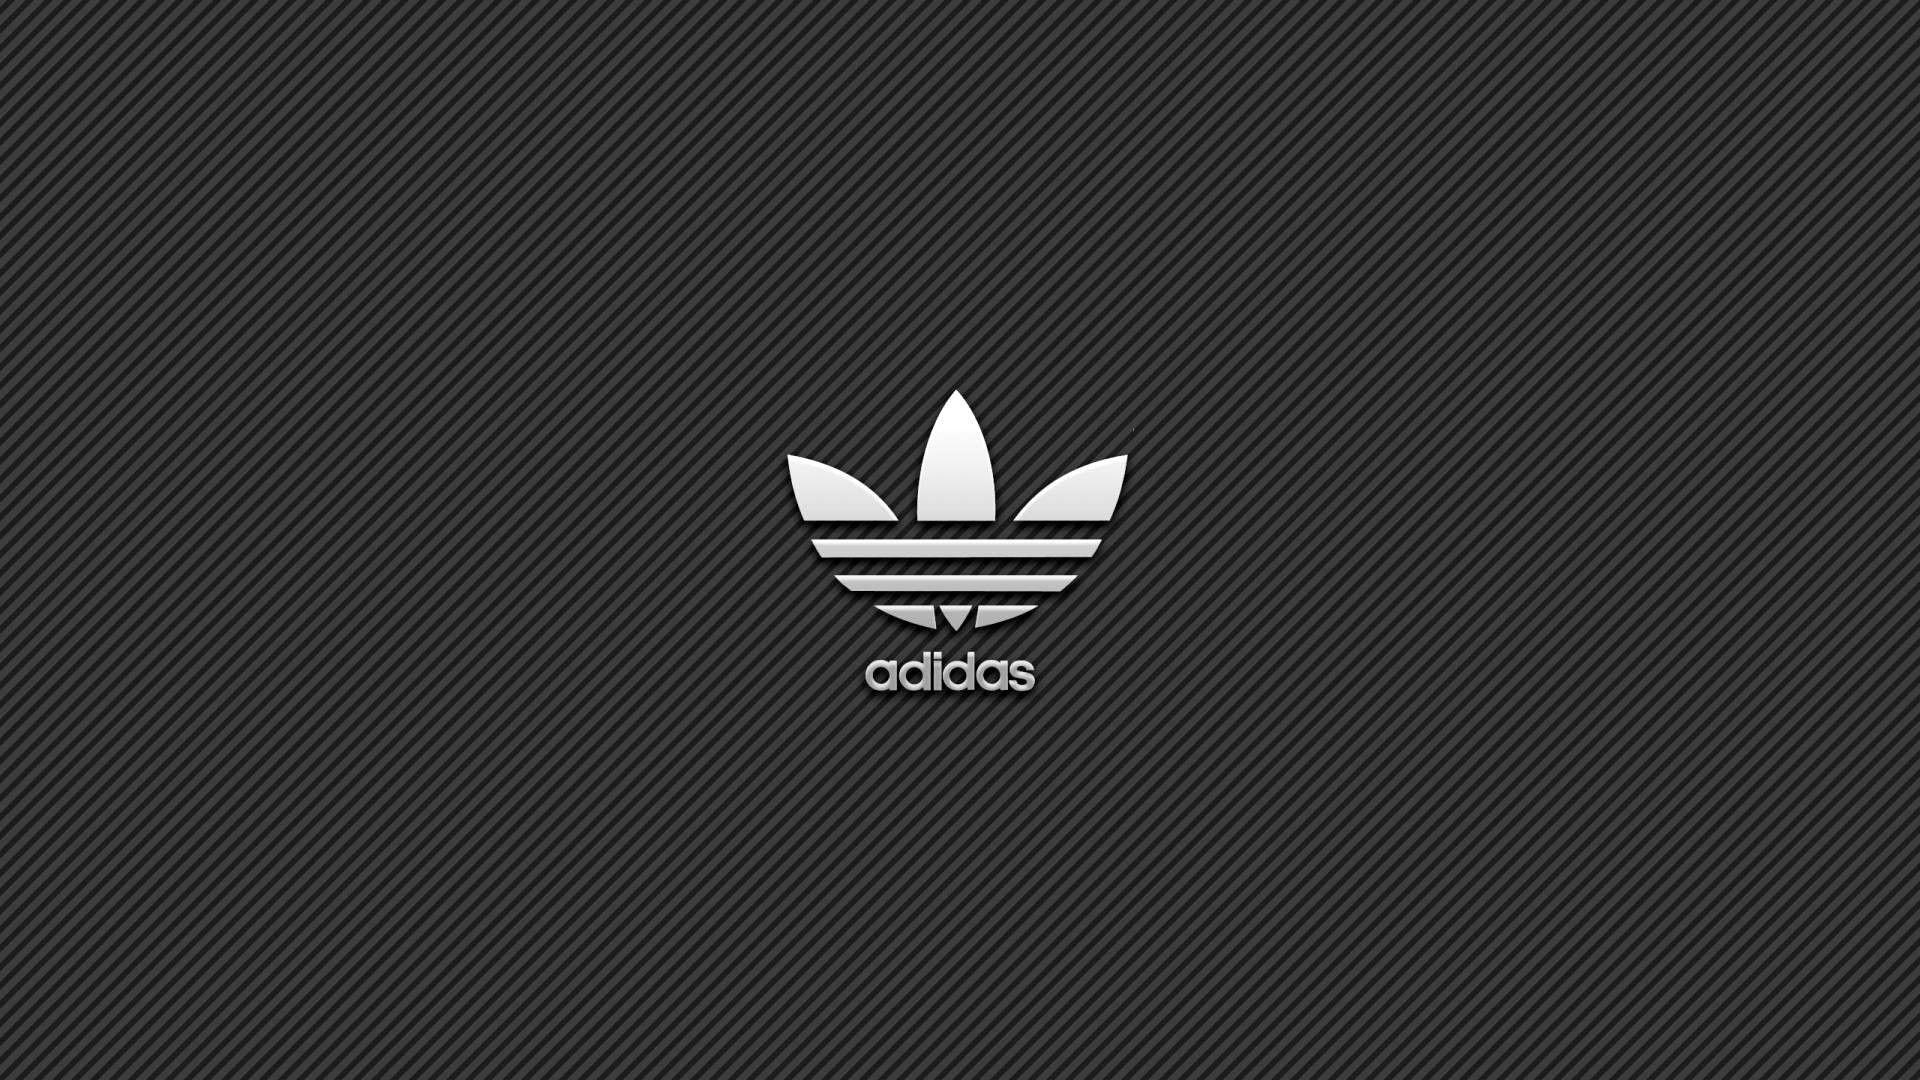 Adidas Full HD Wallpaper and Background Imagex1080